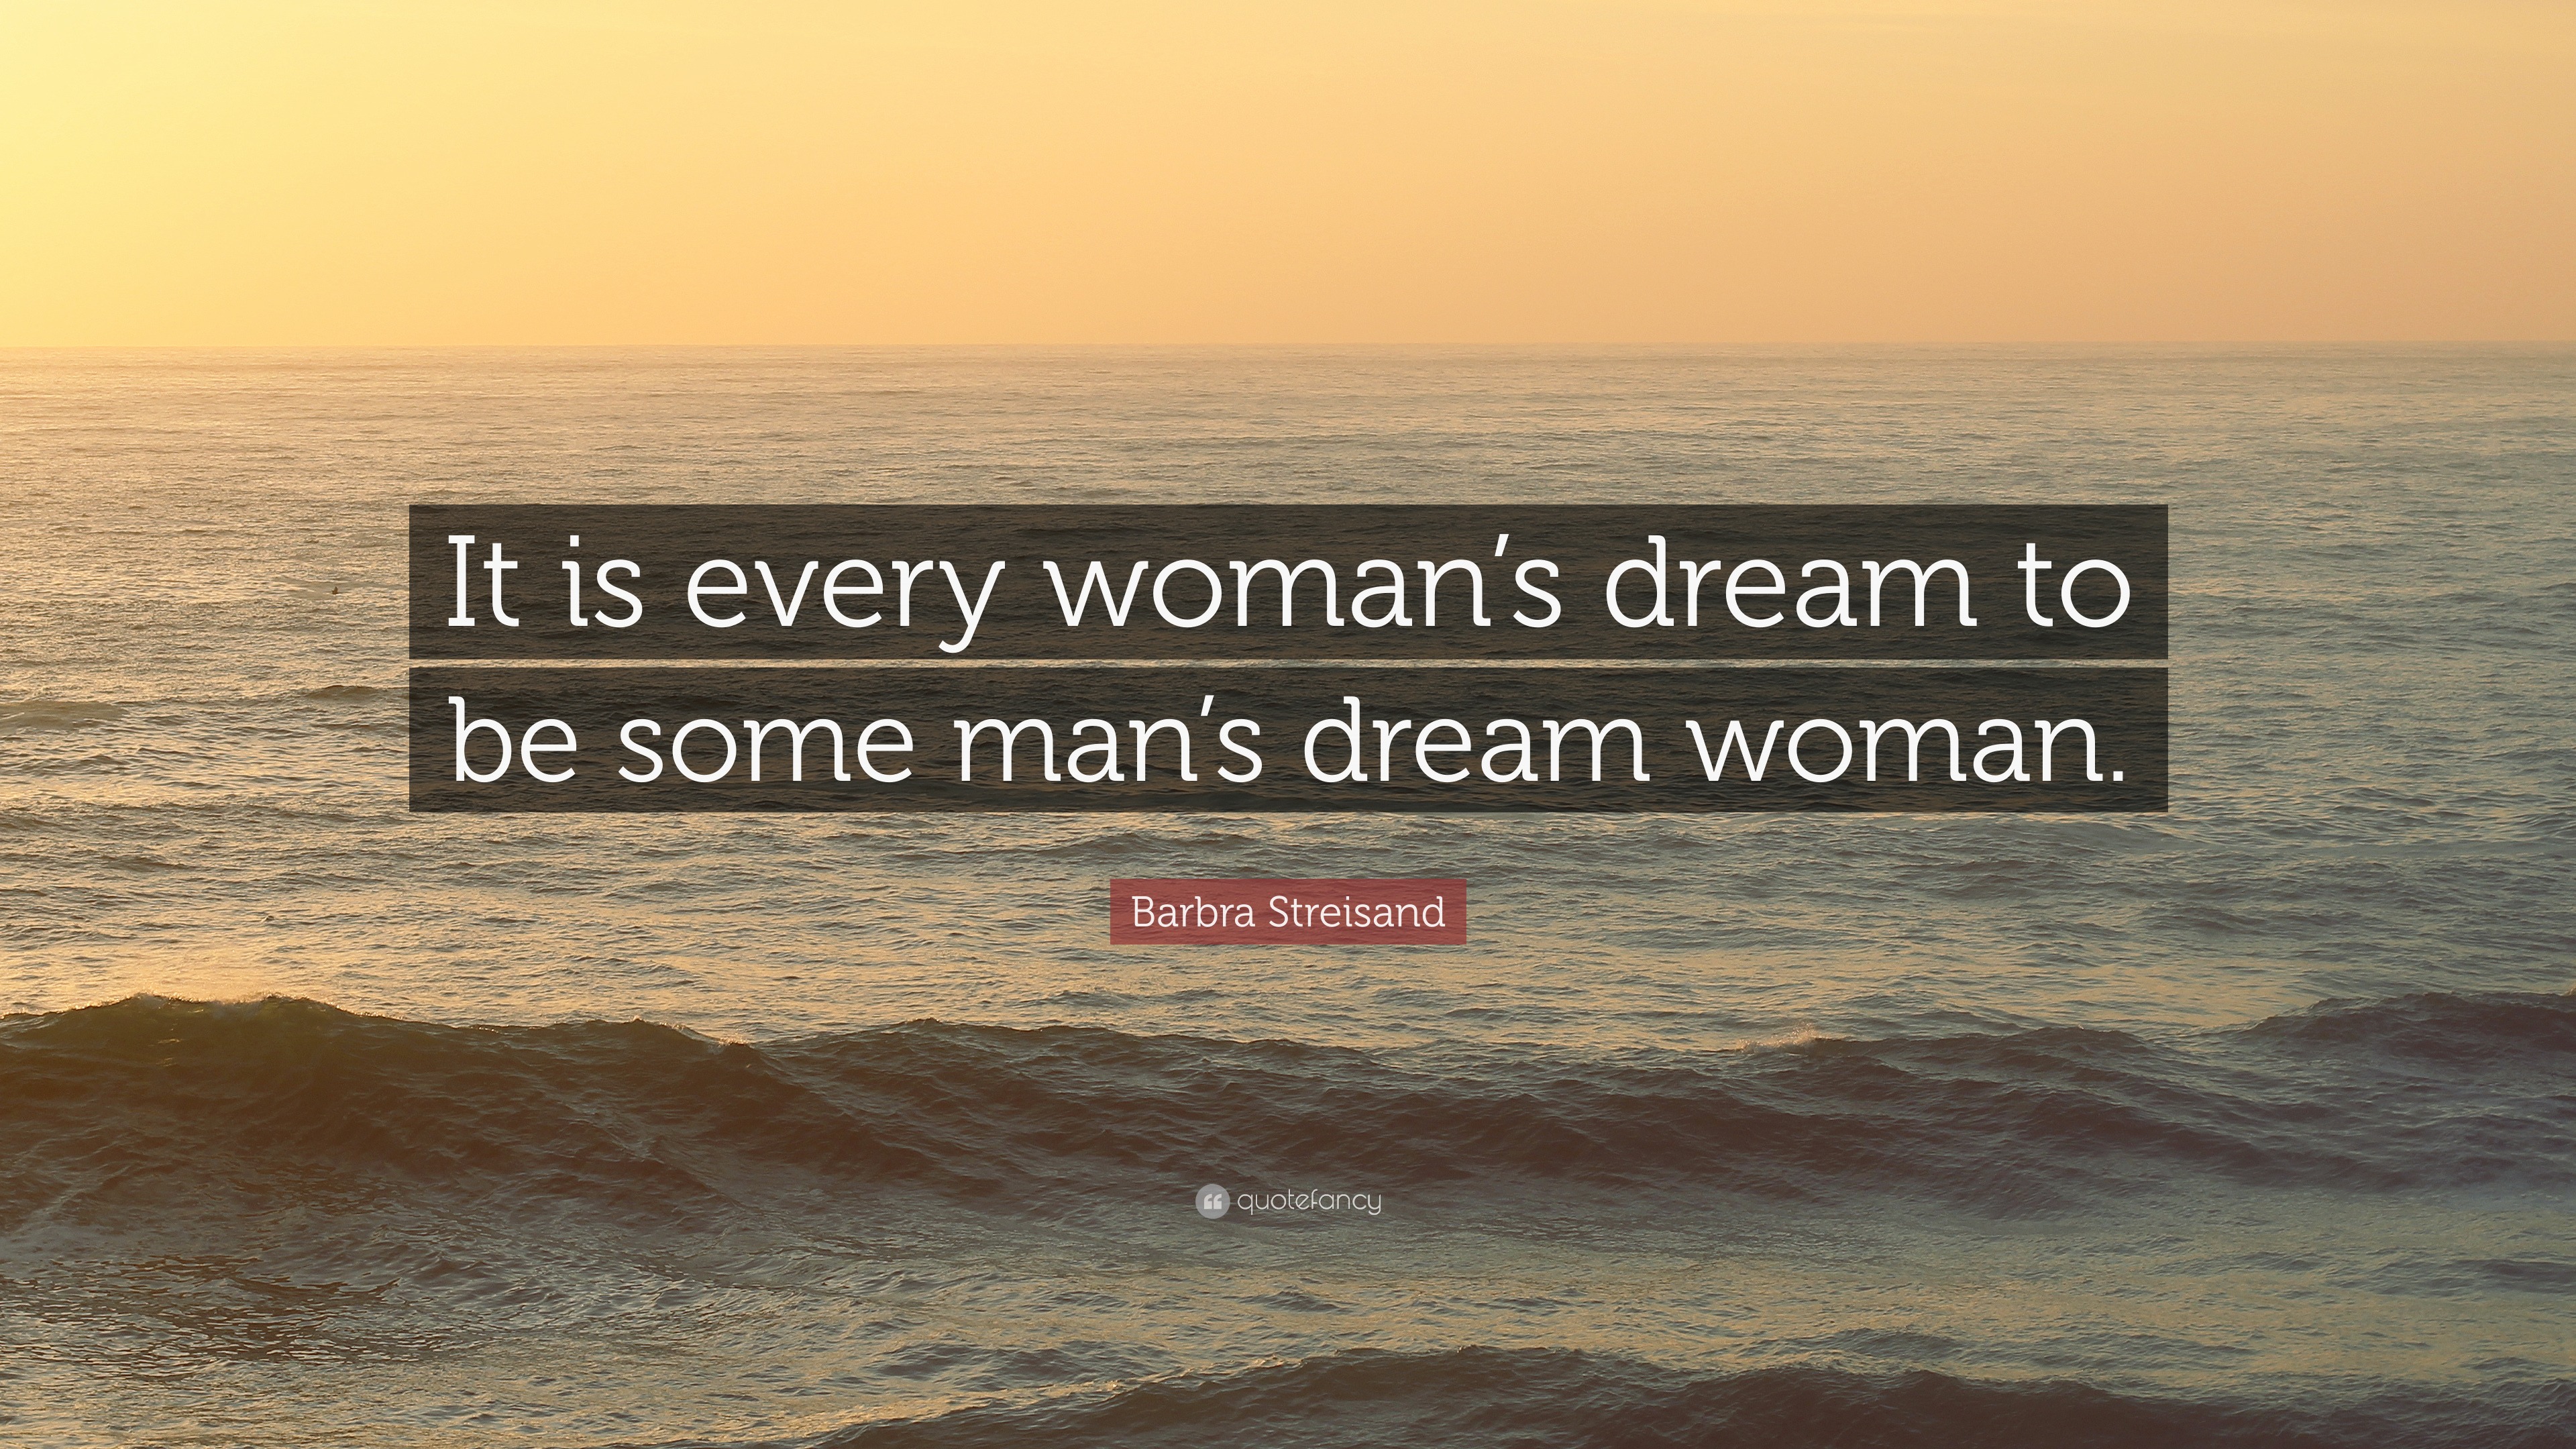 Barbra Streisand Quote It Is Every Woman S Dream To Be Some